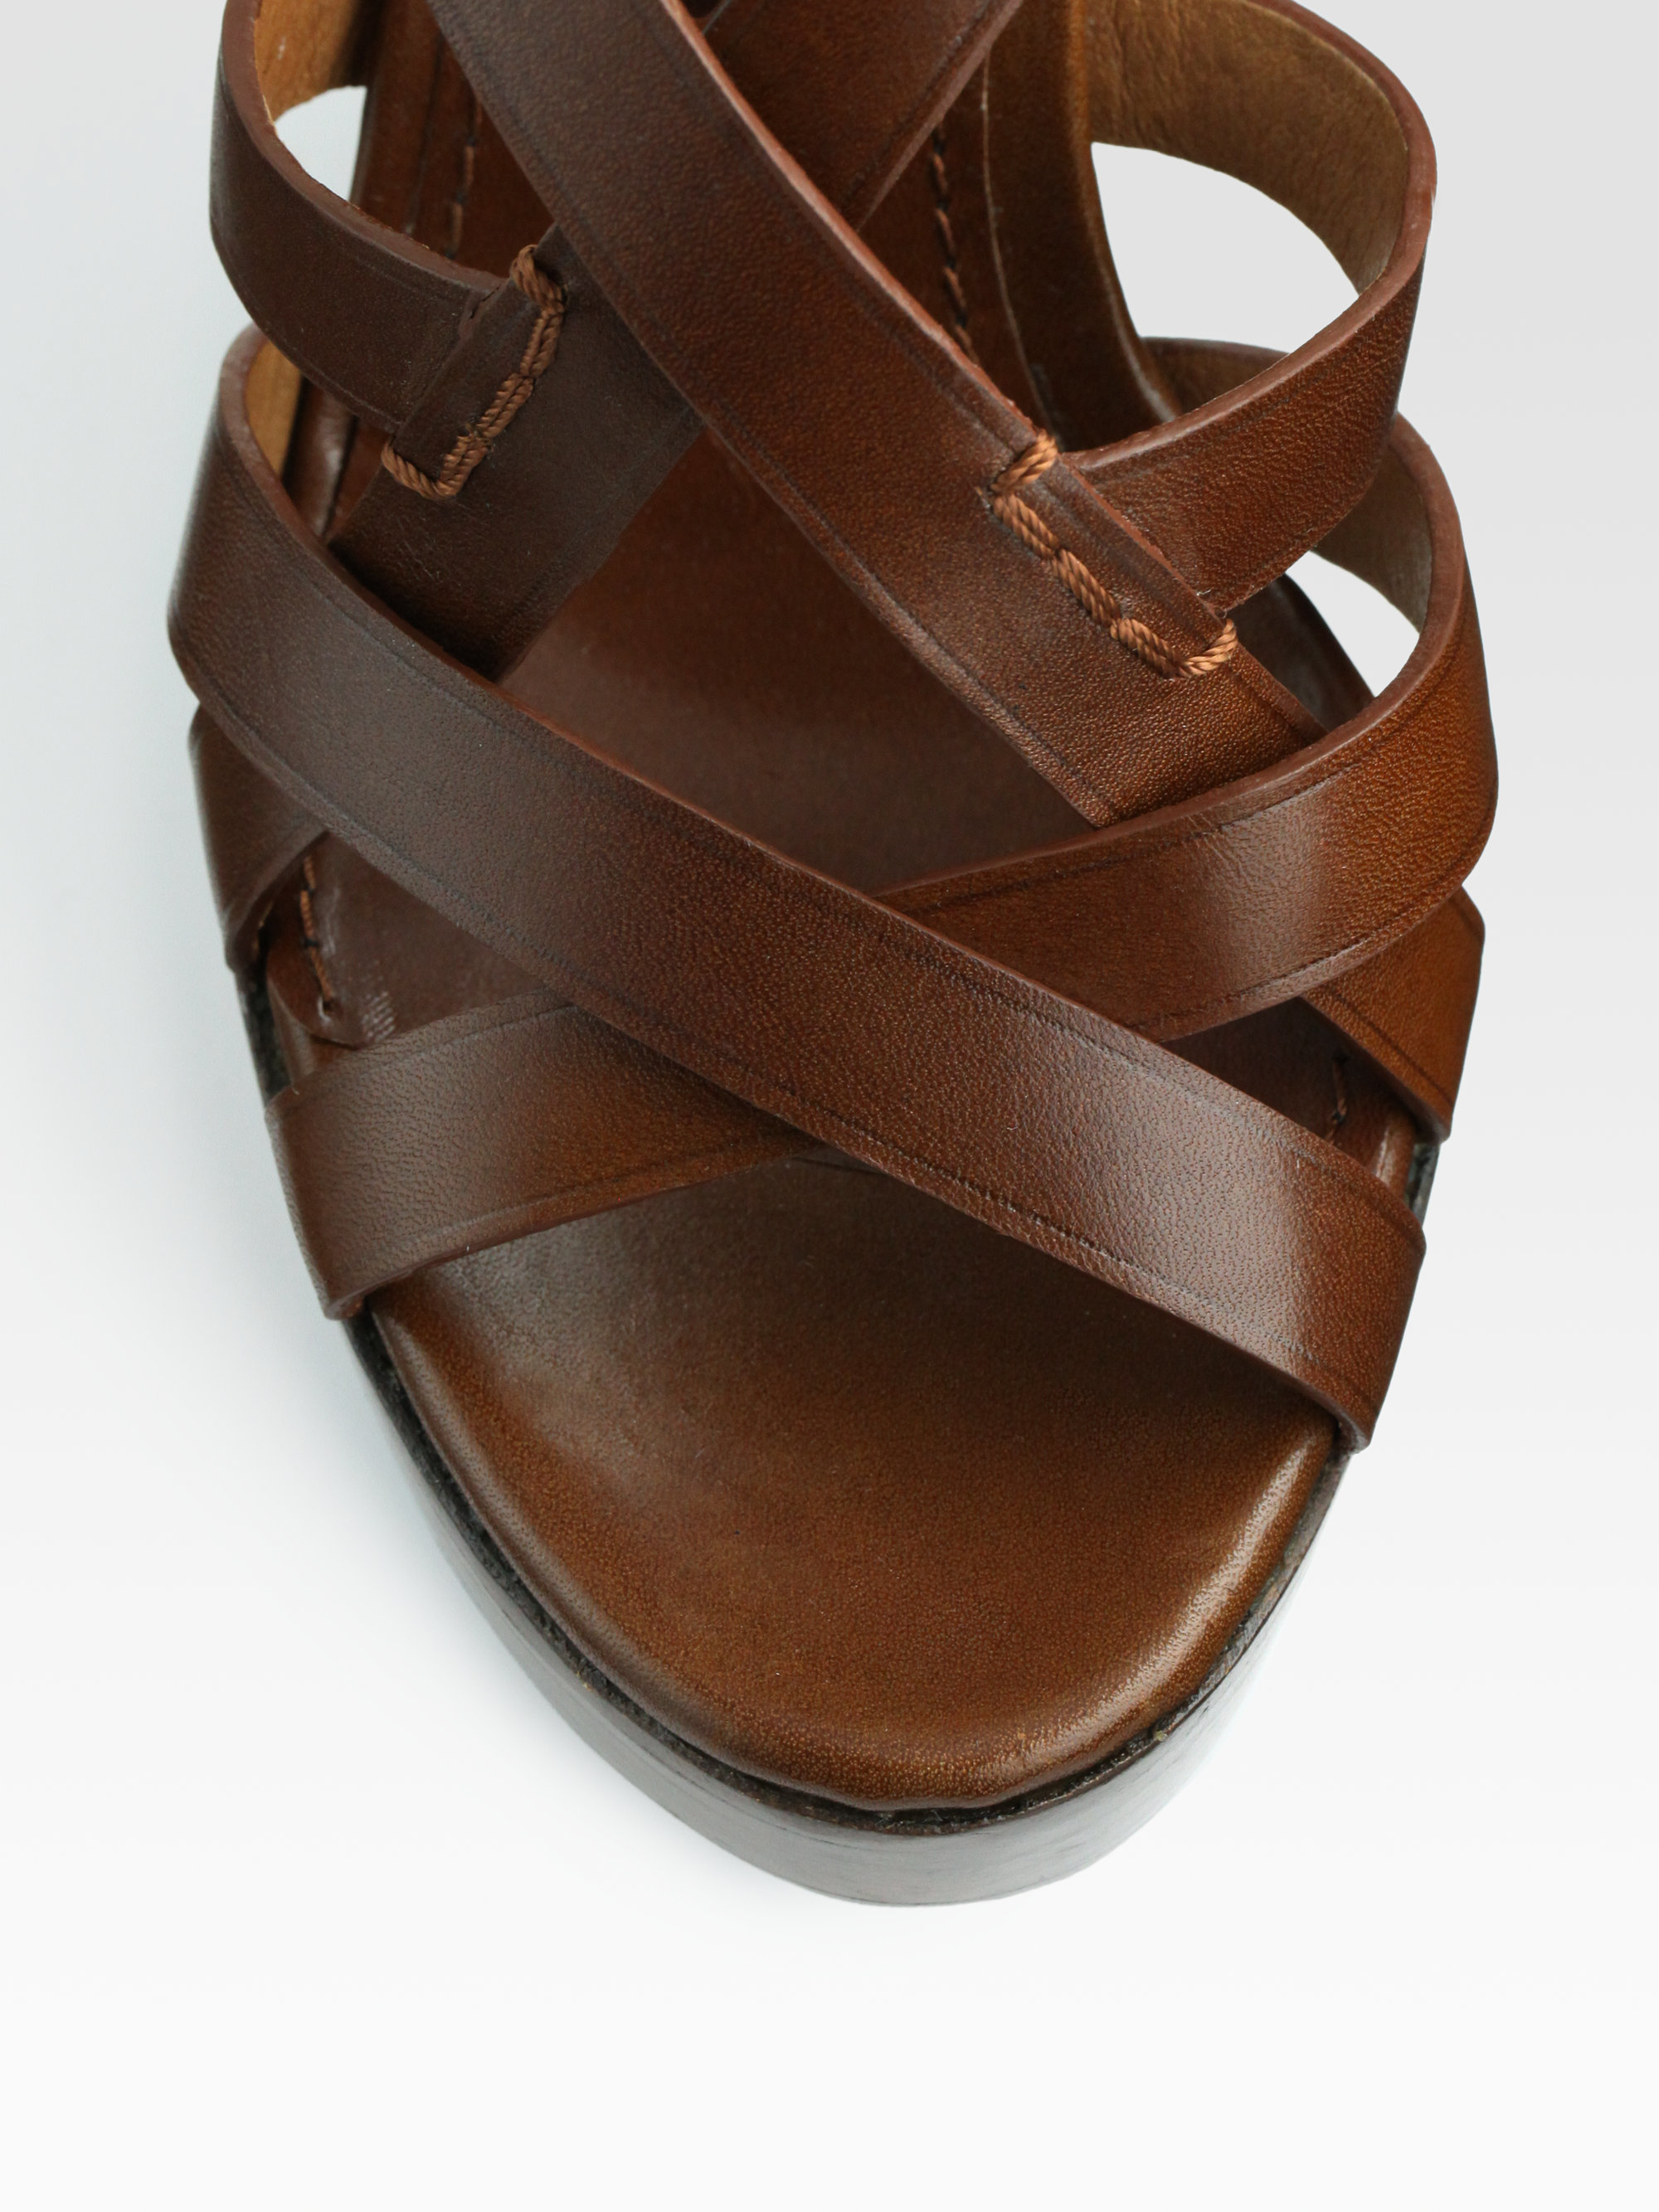 brown wedge sandals for women